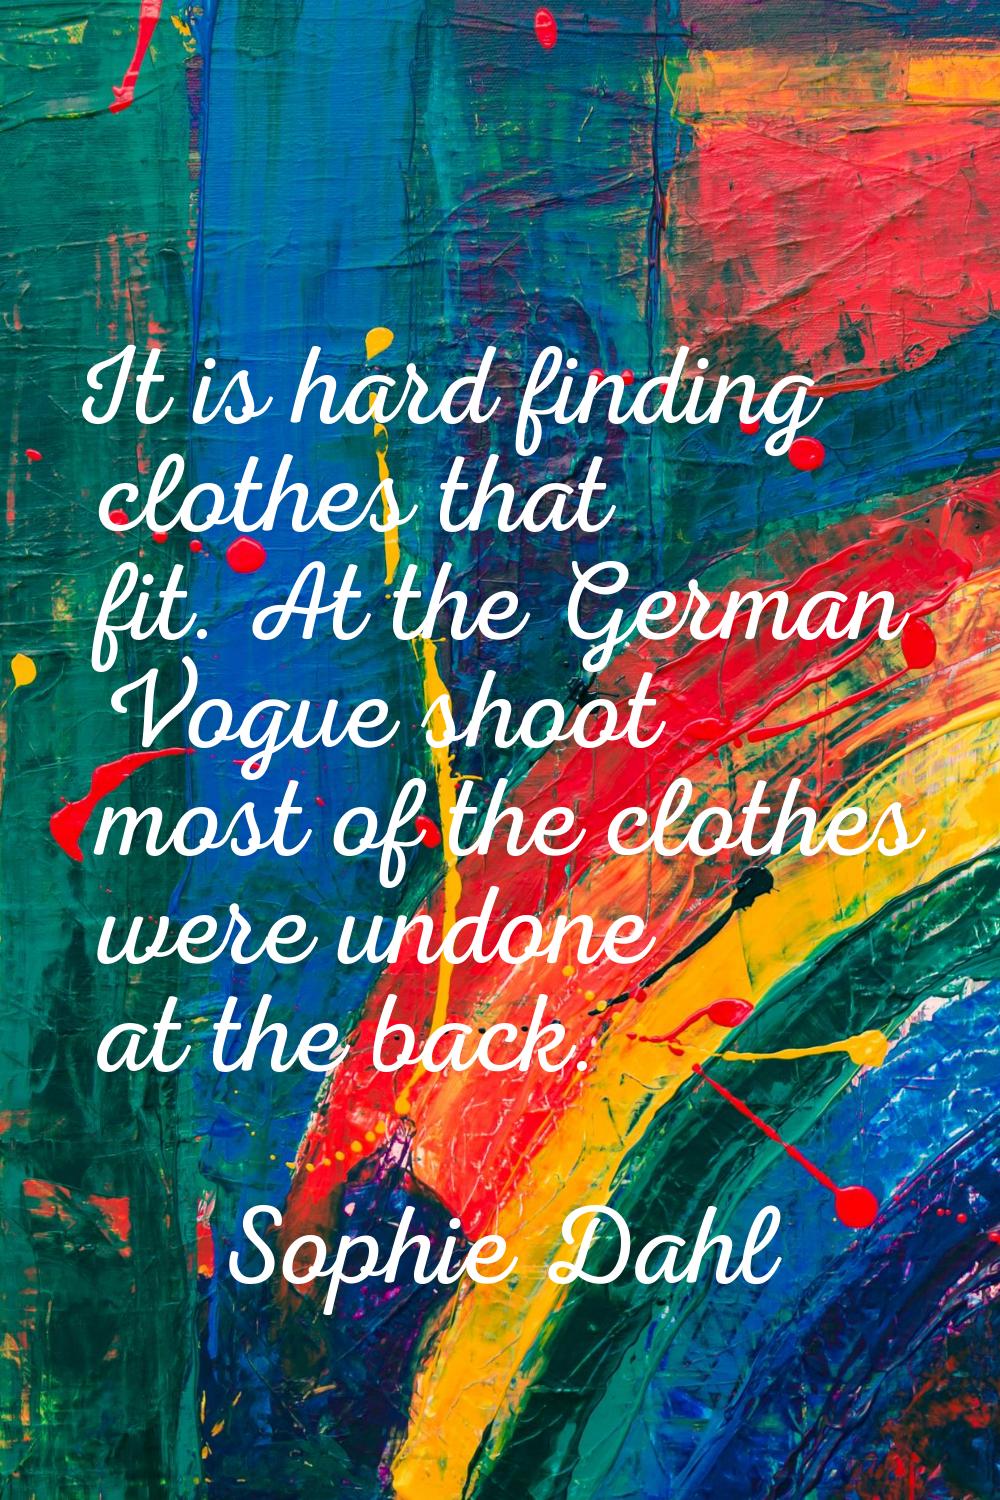 It is hard finding clothes that fit. At the German Vogue shoot most of the clothes were undone at t